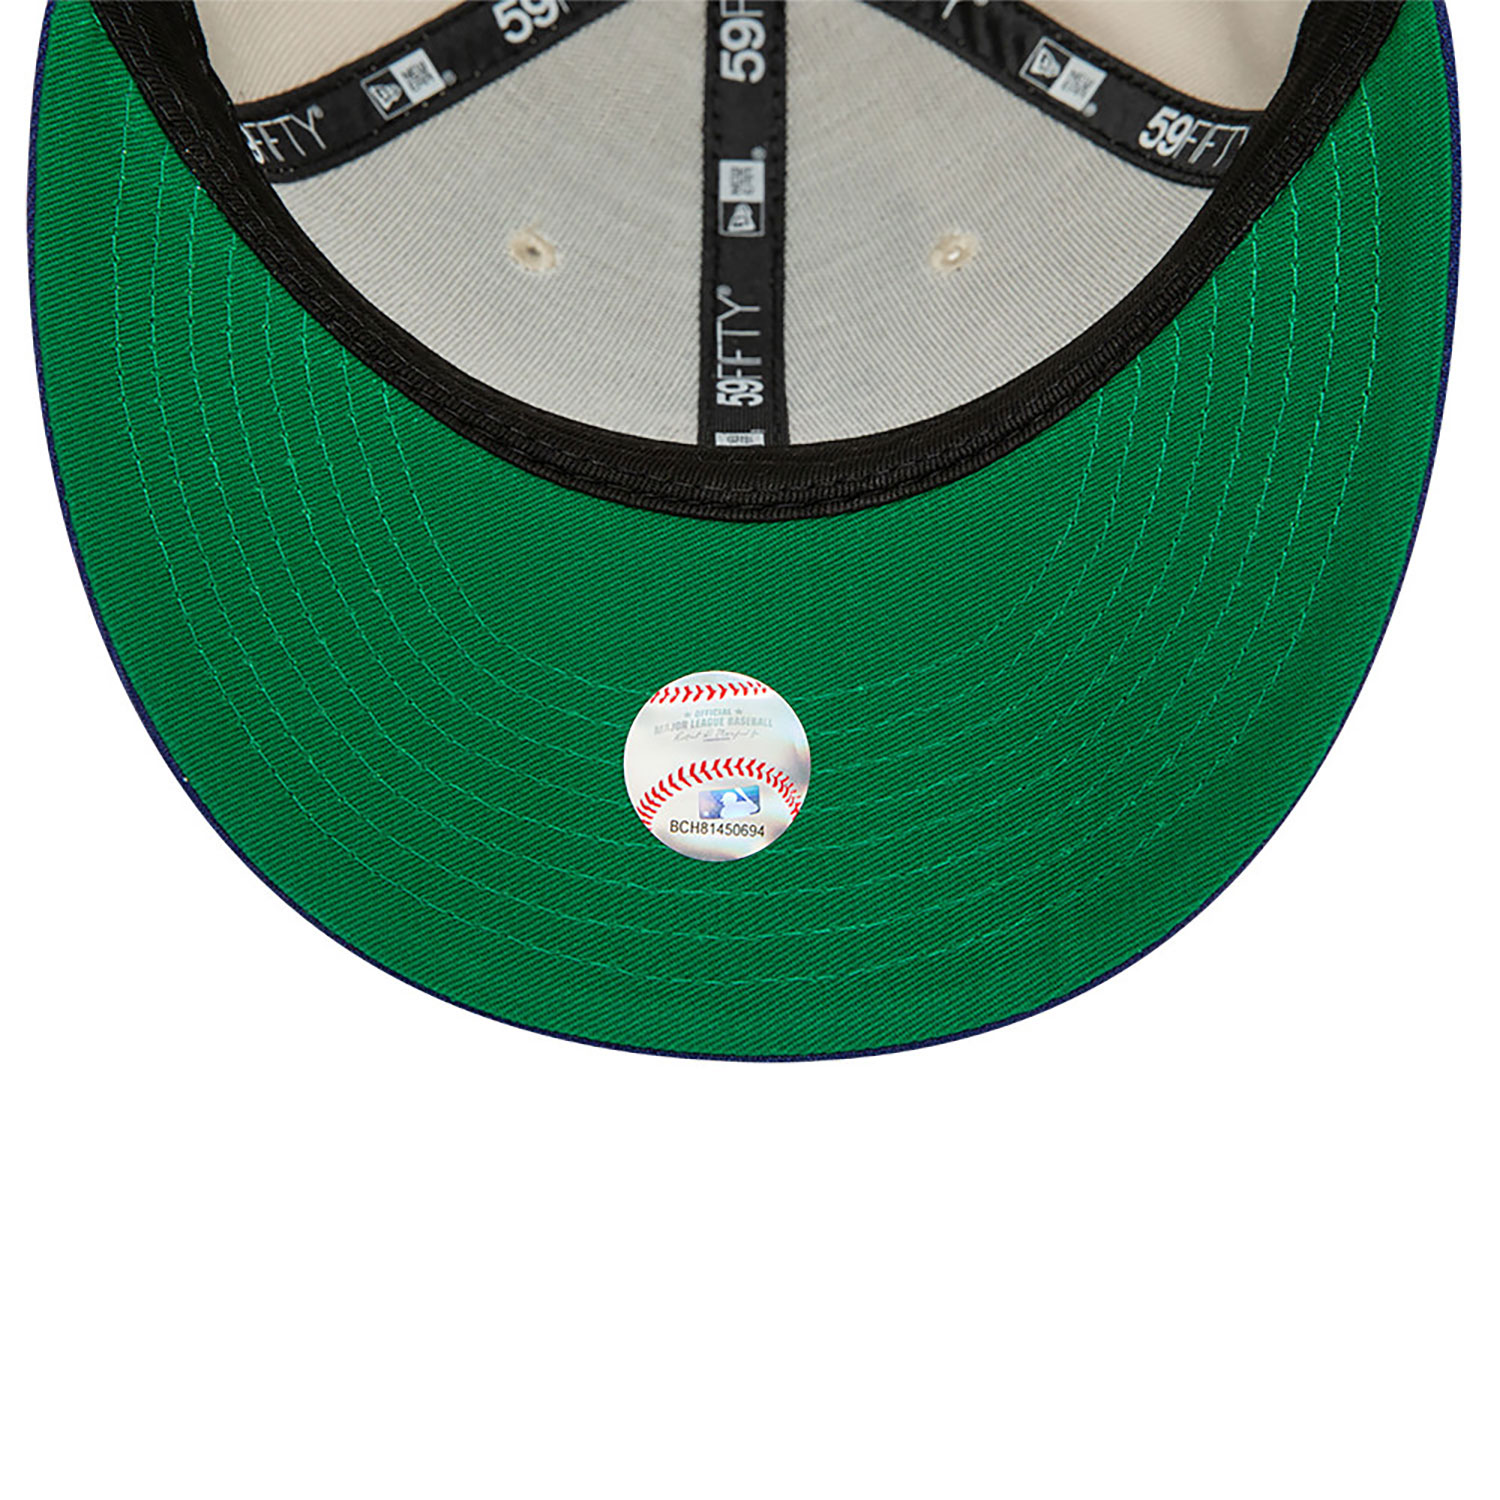 Chicago Cubs Mascot Beige 59FIFTY Low Profile Cap